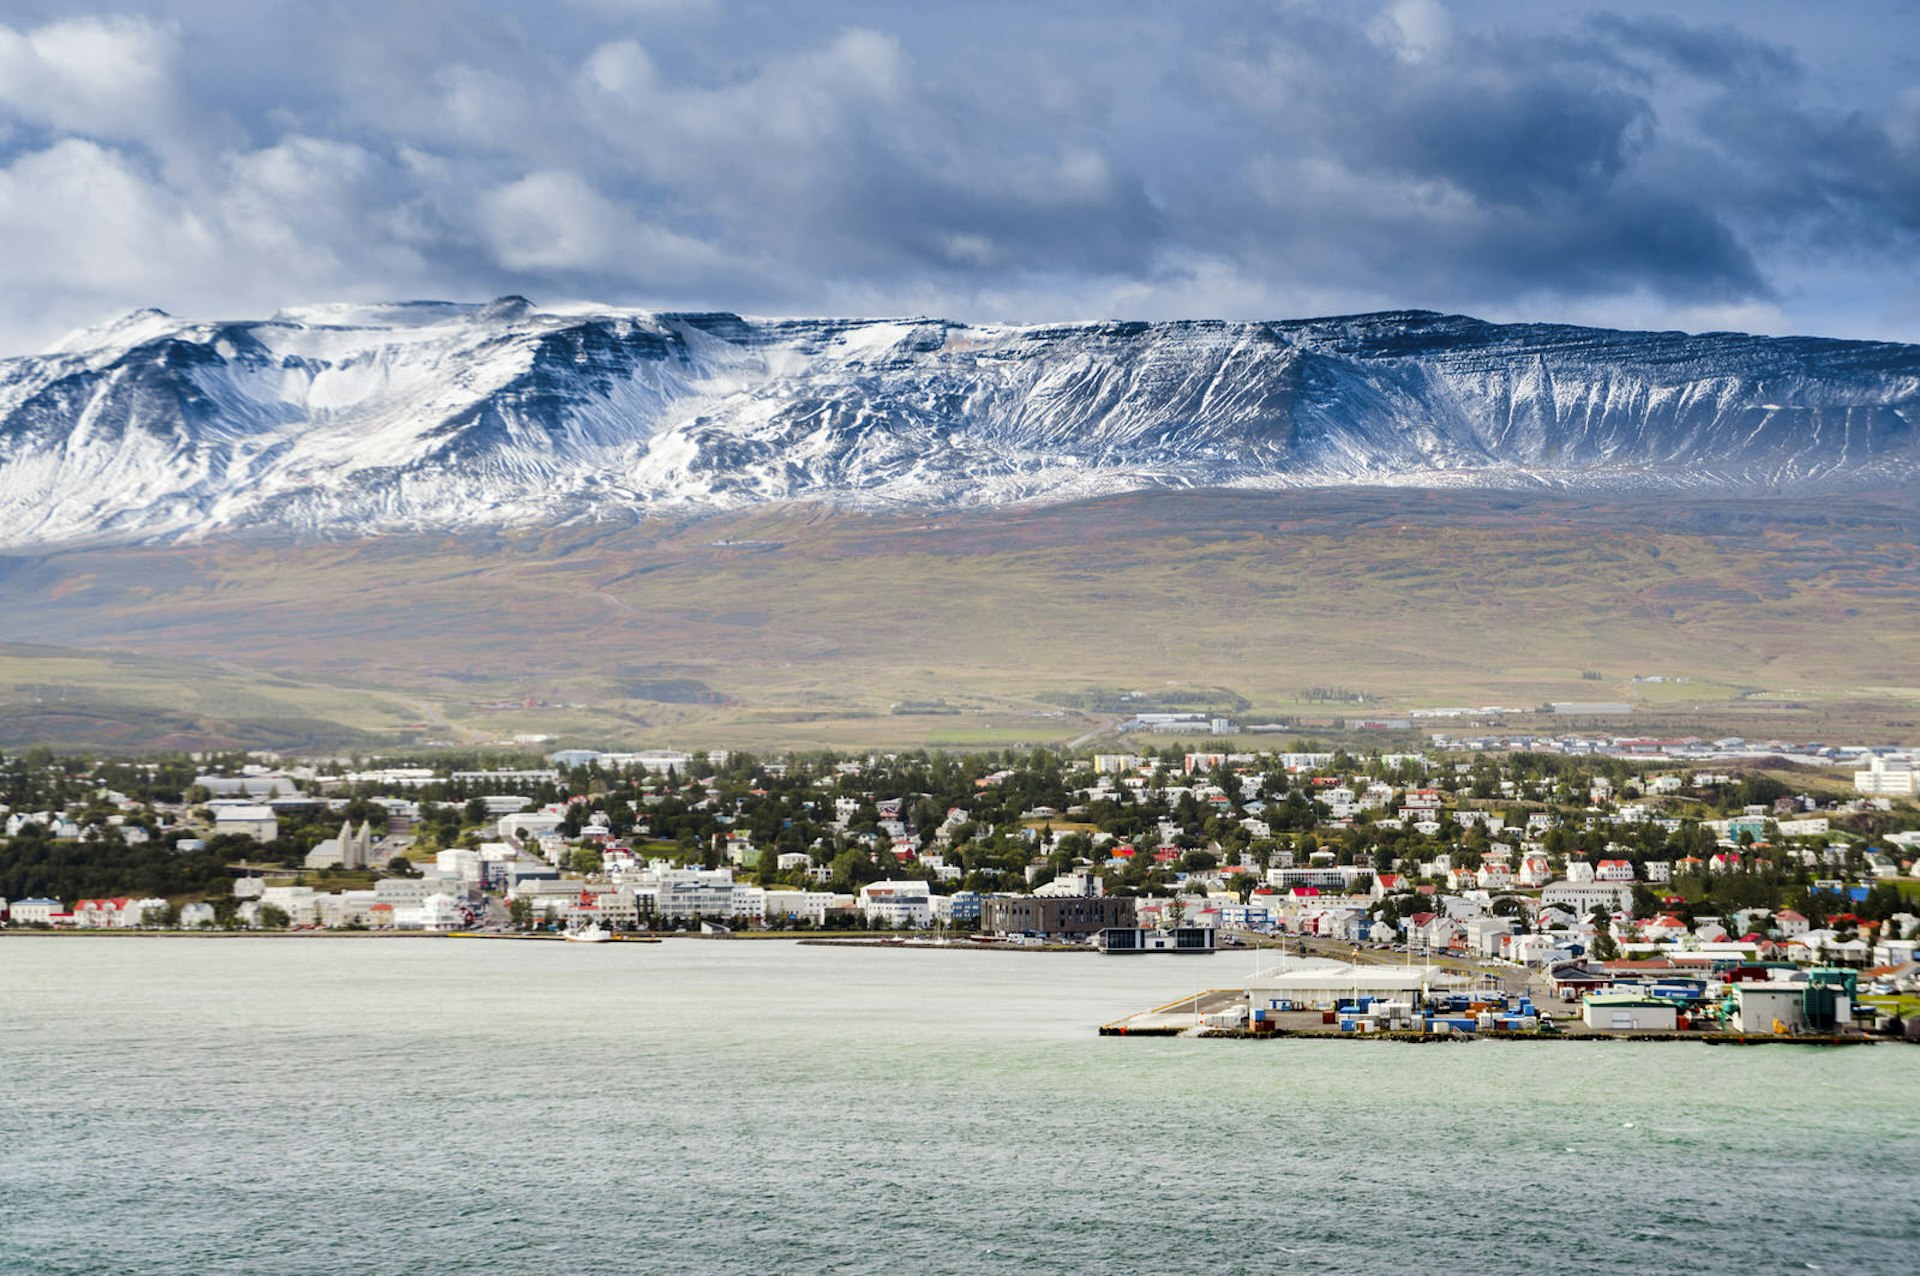 Flat-topped and snow-capped mountains back the city of Akureyri and its harbour on Eyjafjordur. This city marks the start of the North Iceland road trip ©subtik / Getty Images